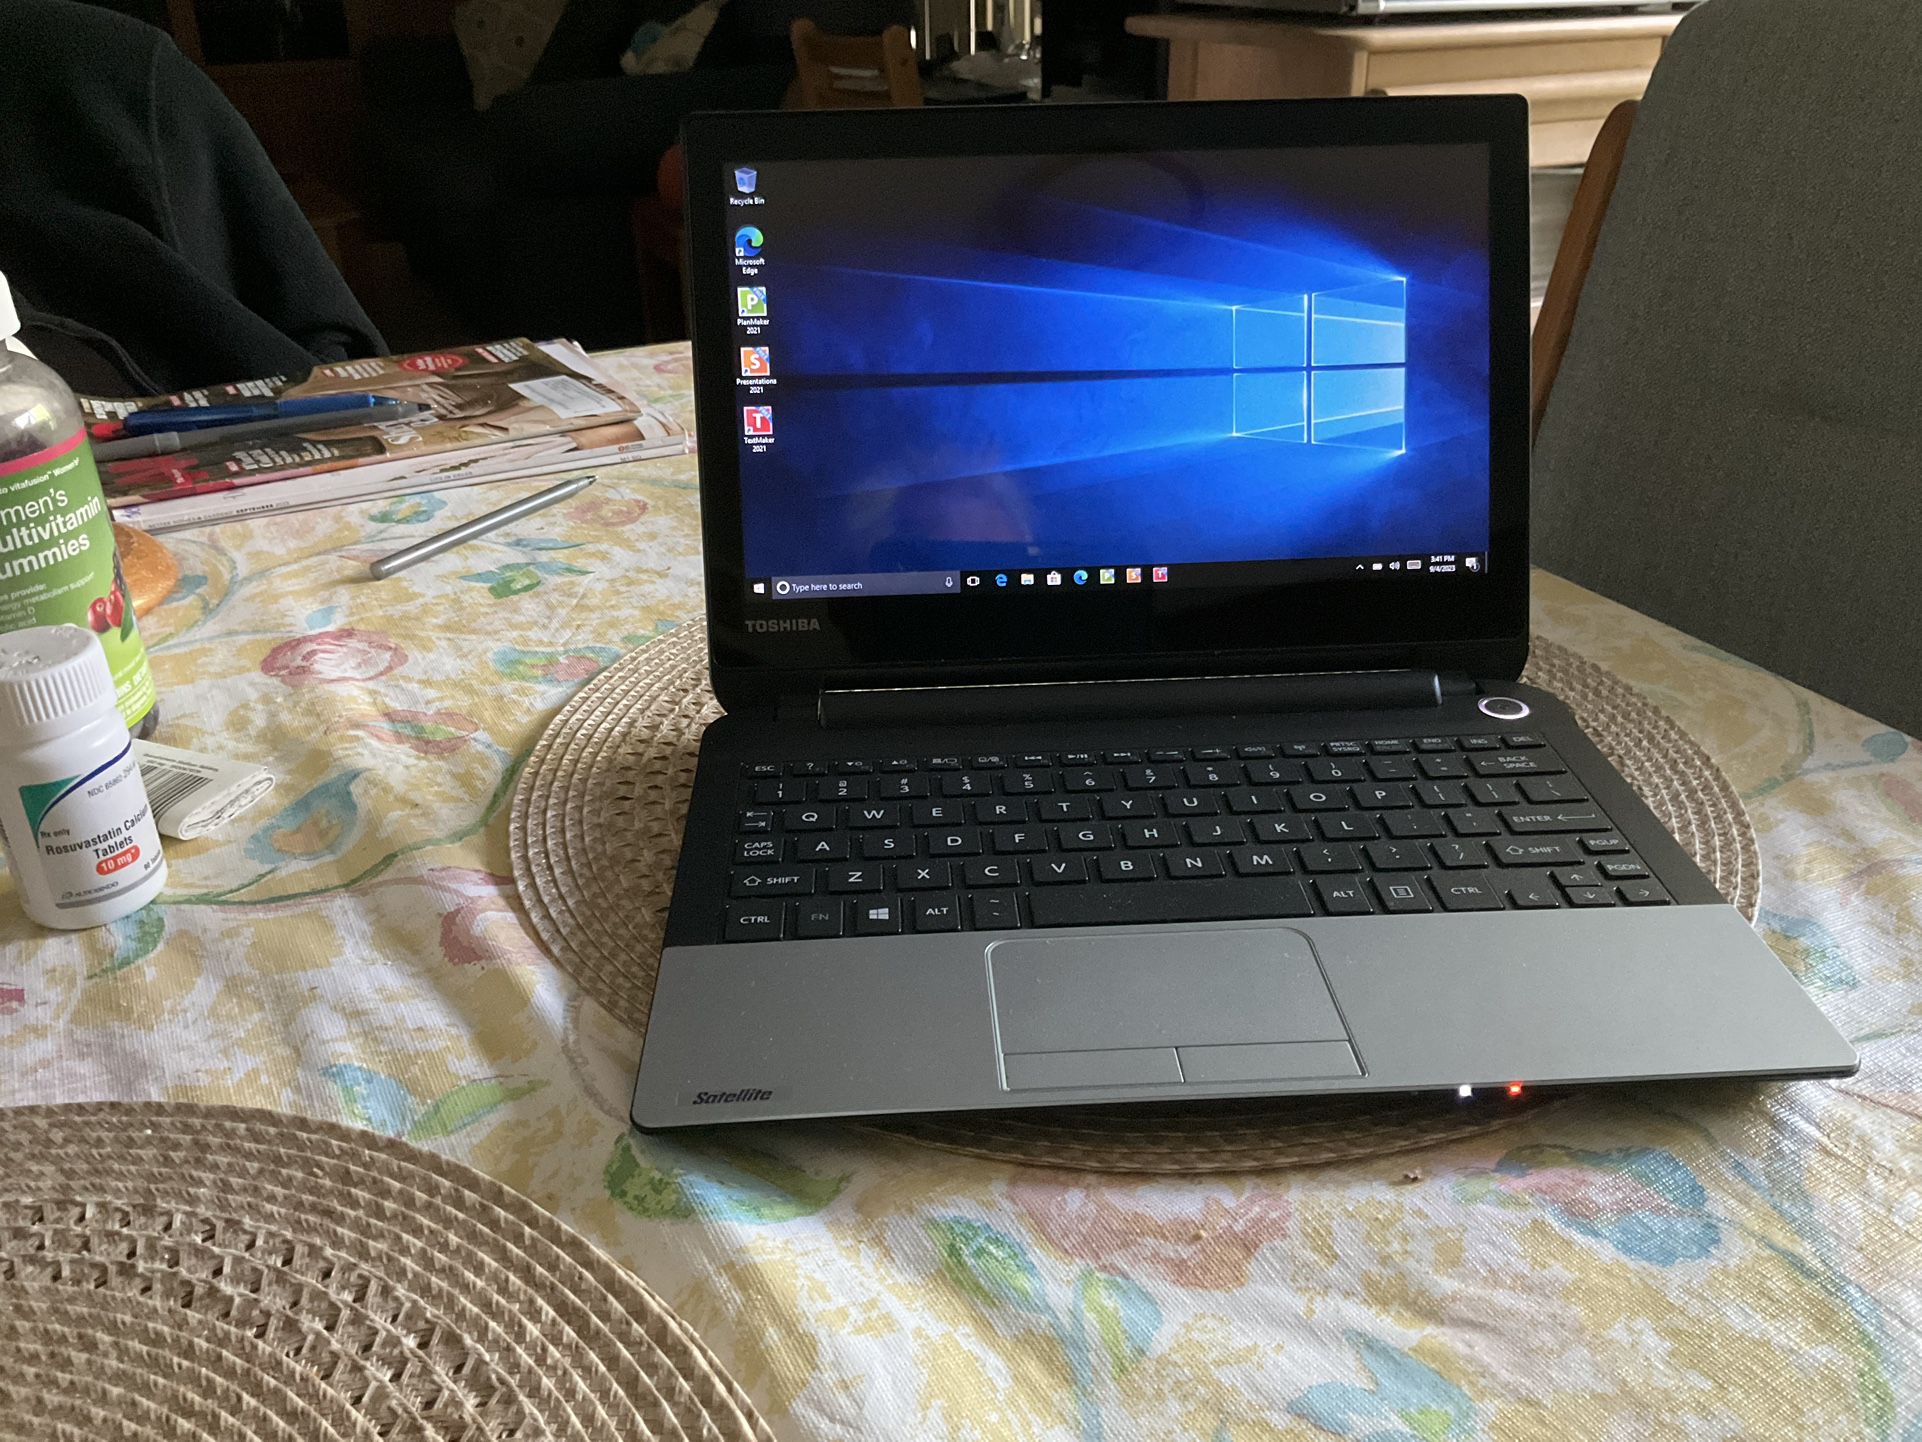 Toshiba Satellite Laptop, 11 Inch Touch Screen, Windows 10, Like New Condition, 4gb Memory, 450gb Hard Drive